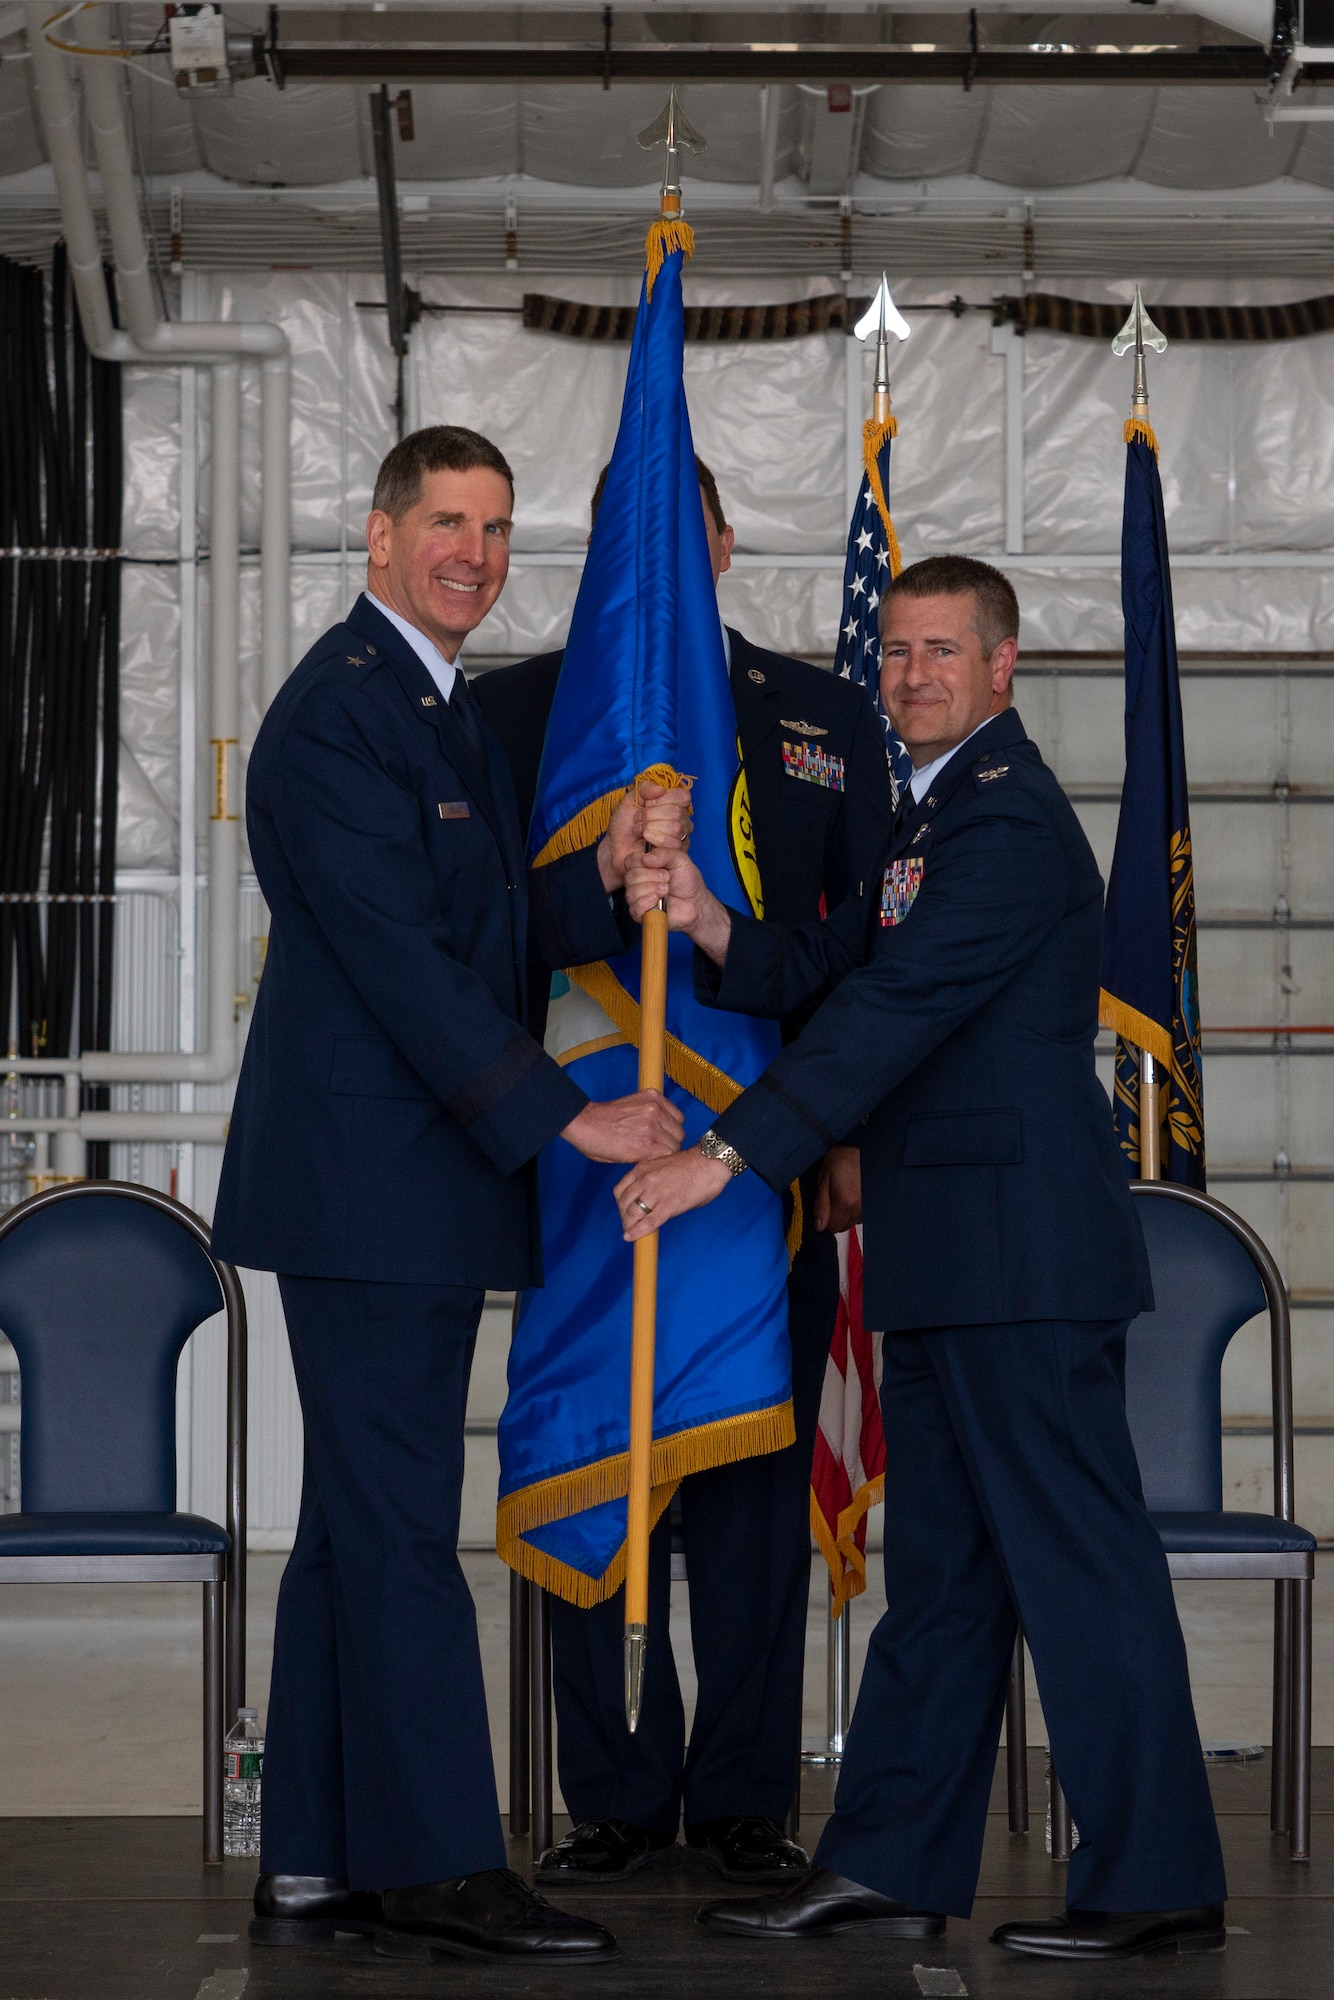 Brig. Gen. Jed French, commander of the New Hampshire Air National Guard, passes the 157th Air Refueling Wing guidon to Col. Nelson Perron during a ceremony June 4, 2022, at Pease Air National Guard Base, New Hampshire. Perron officially assumed command of the wing during the ceremony. (U.S. Air National Guard photo by Staff Sgt. Taylor Queen)